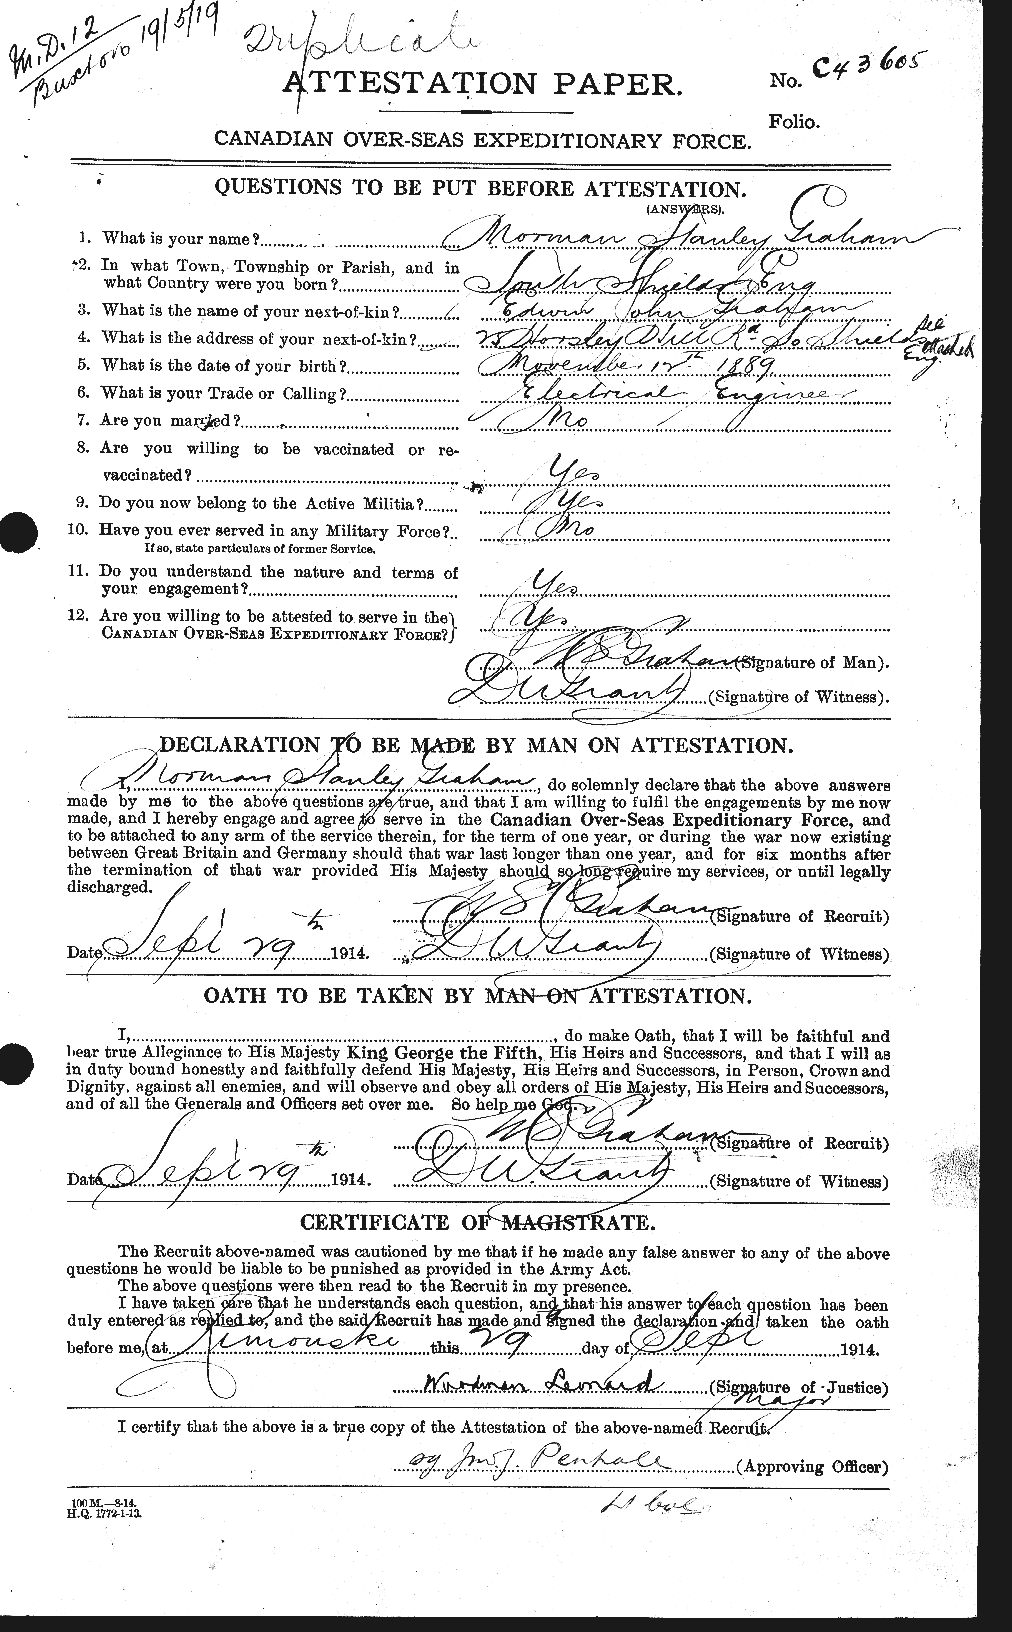 Personnel Records of the First World War - CEF 359326a